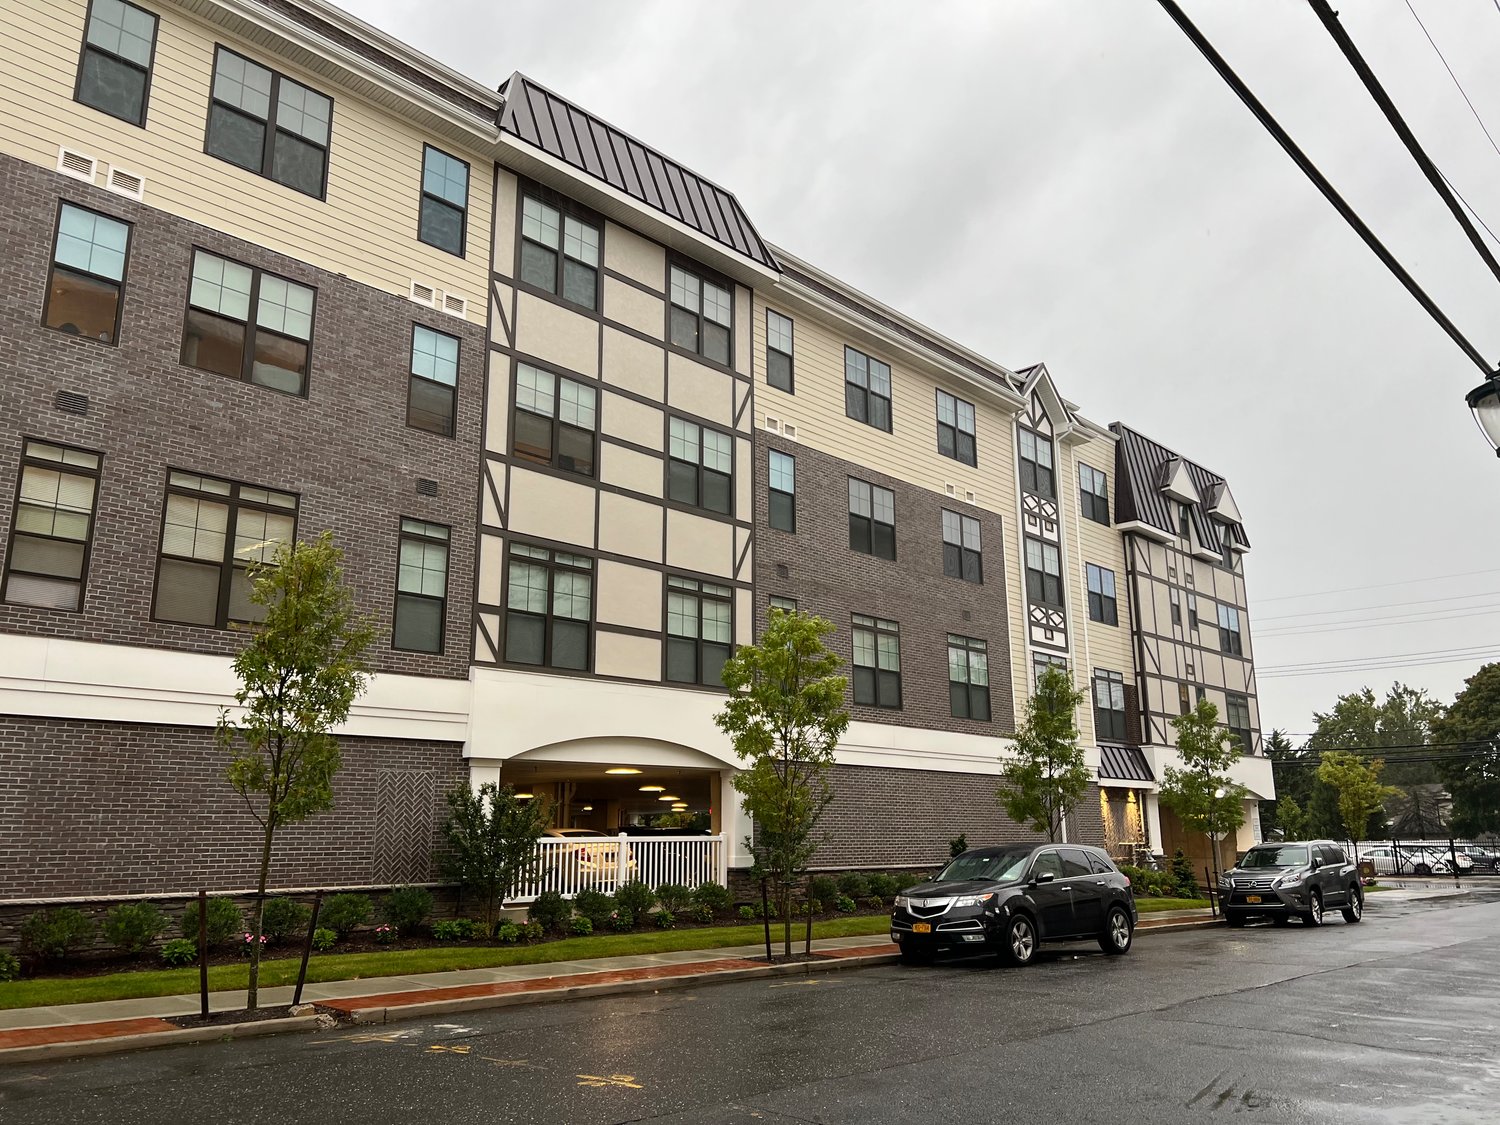 The Cornerstone at Yorkshire, at 5 Freer St. in Lynbrook, was recently sold to the Birch Group for $42.85 million.